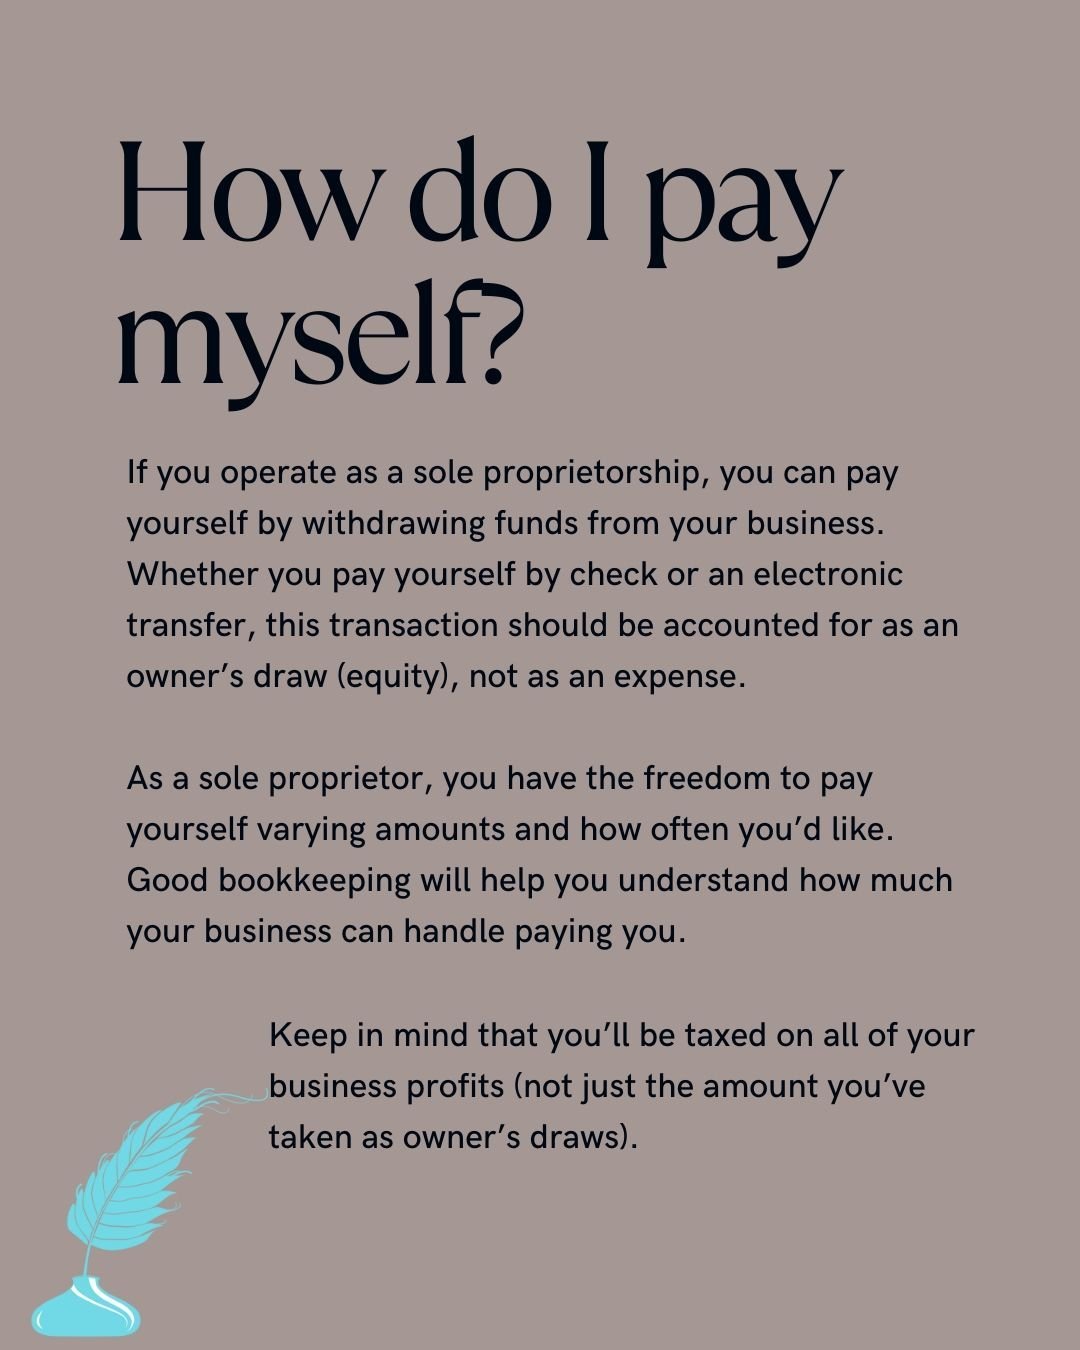 Every single one of my clients wants to know the answer to this question...

HOW do I pay myself? 💸

The short answer is: it depends!

The method(s) you use to pay yourself will vary depending on how your business is set up.

For a sole proprietor o